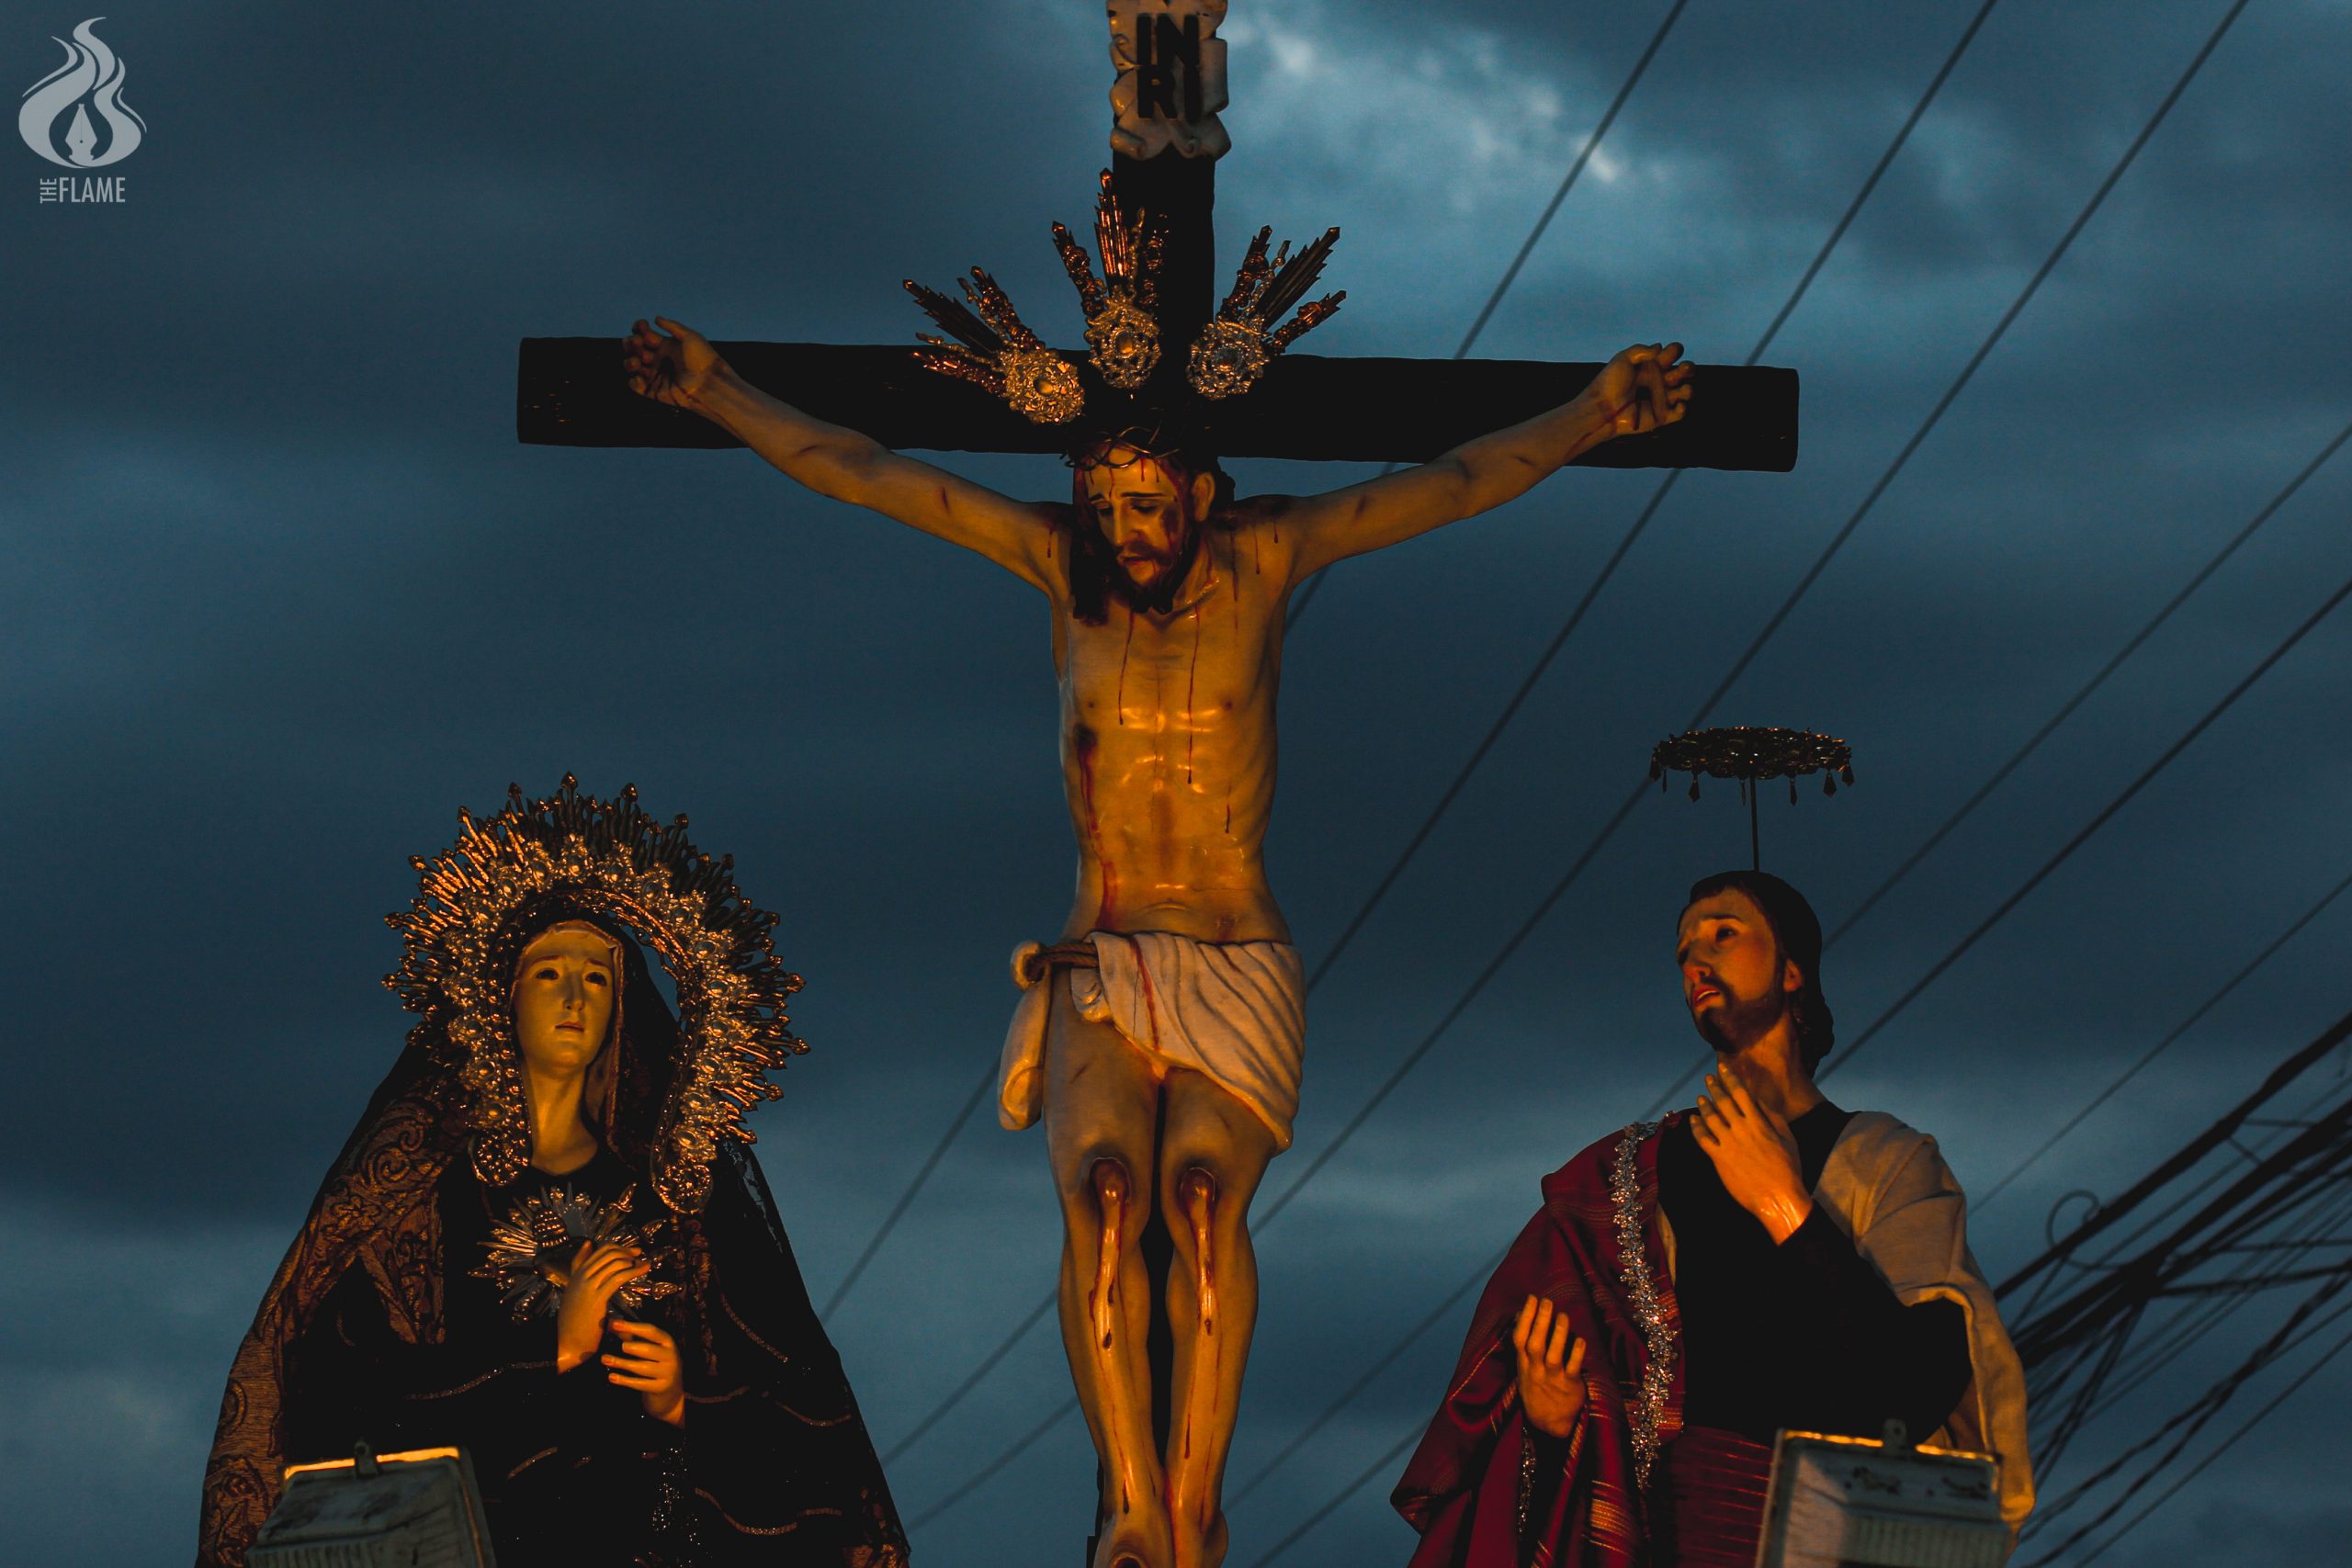 IN PHOTOS: Scenes from Holy Week 2022